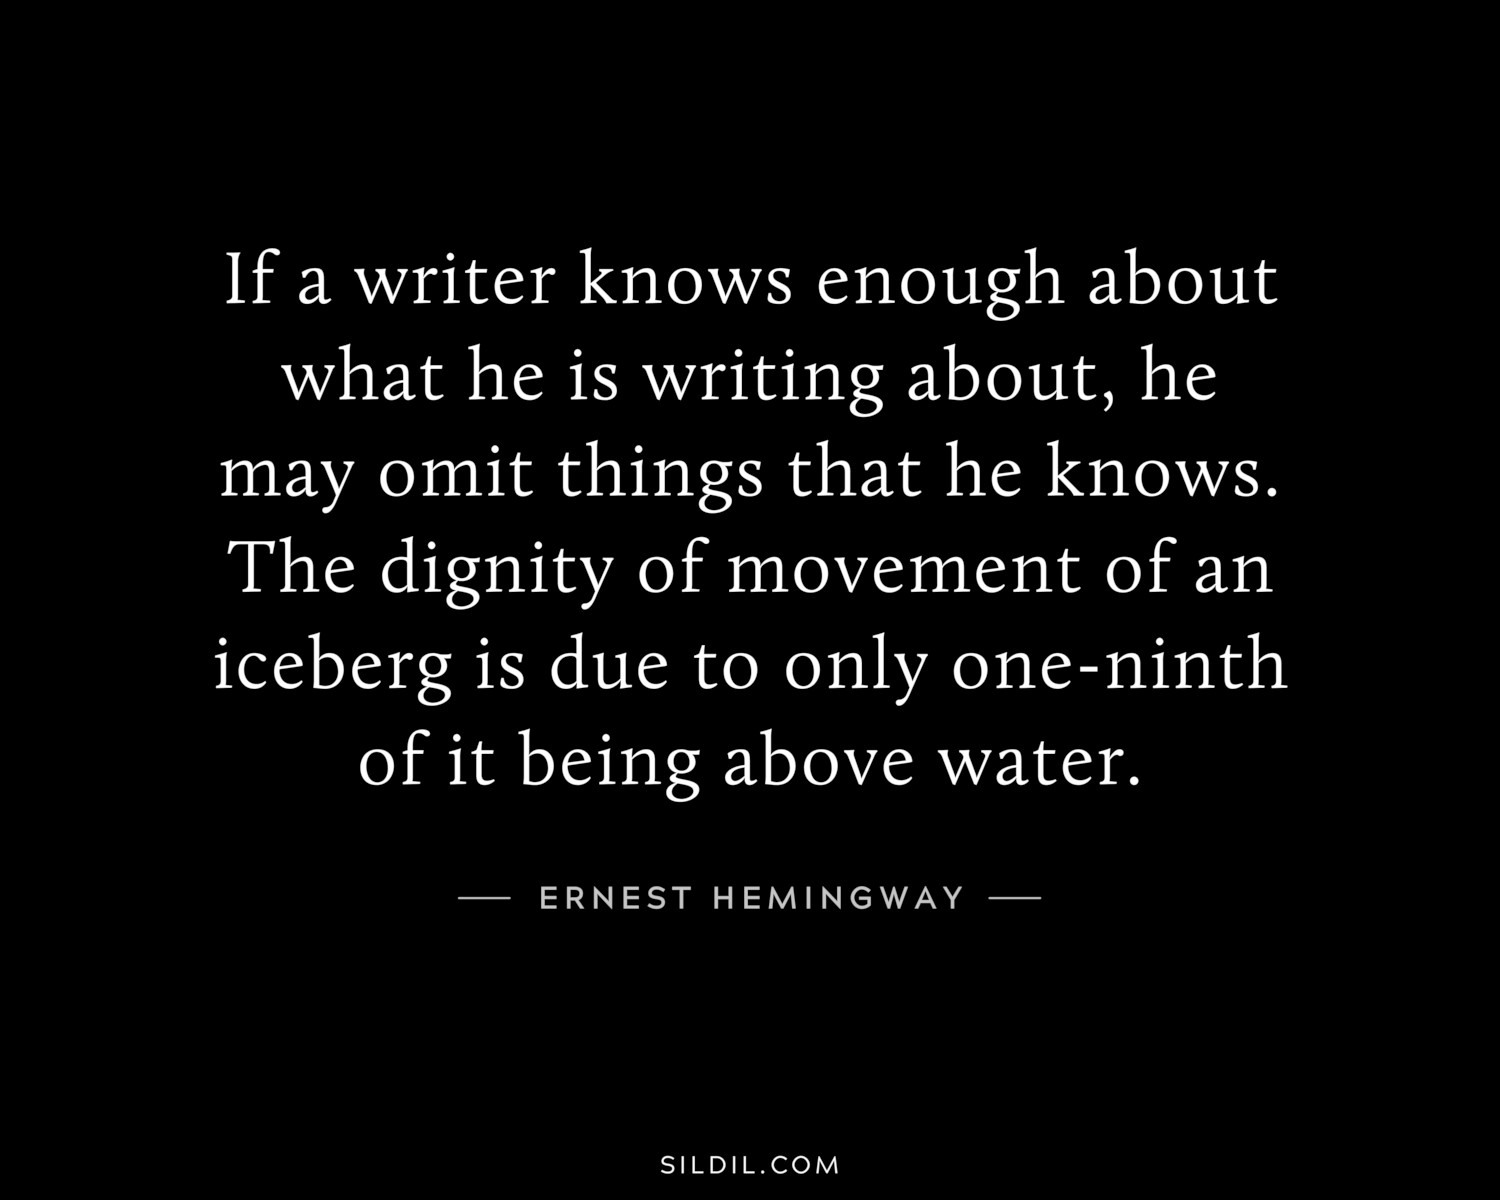 If a writer knows enough about what he is writing about, he may omit things that he knows. The dignity of movement of an iceberg is due to only one-ninth of it being above water.